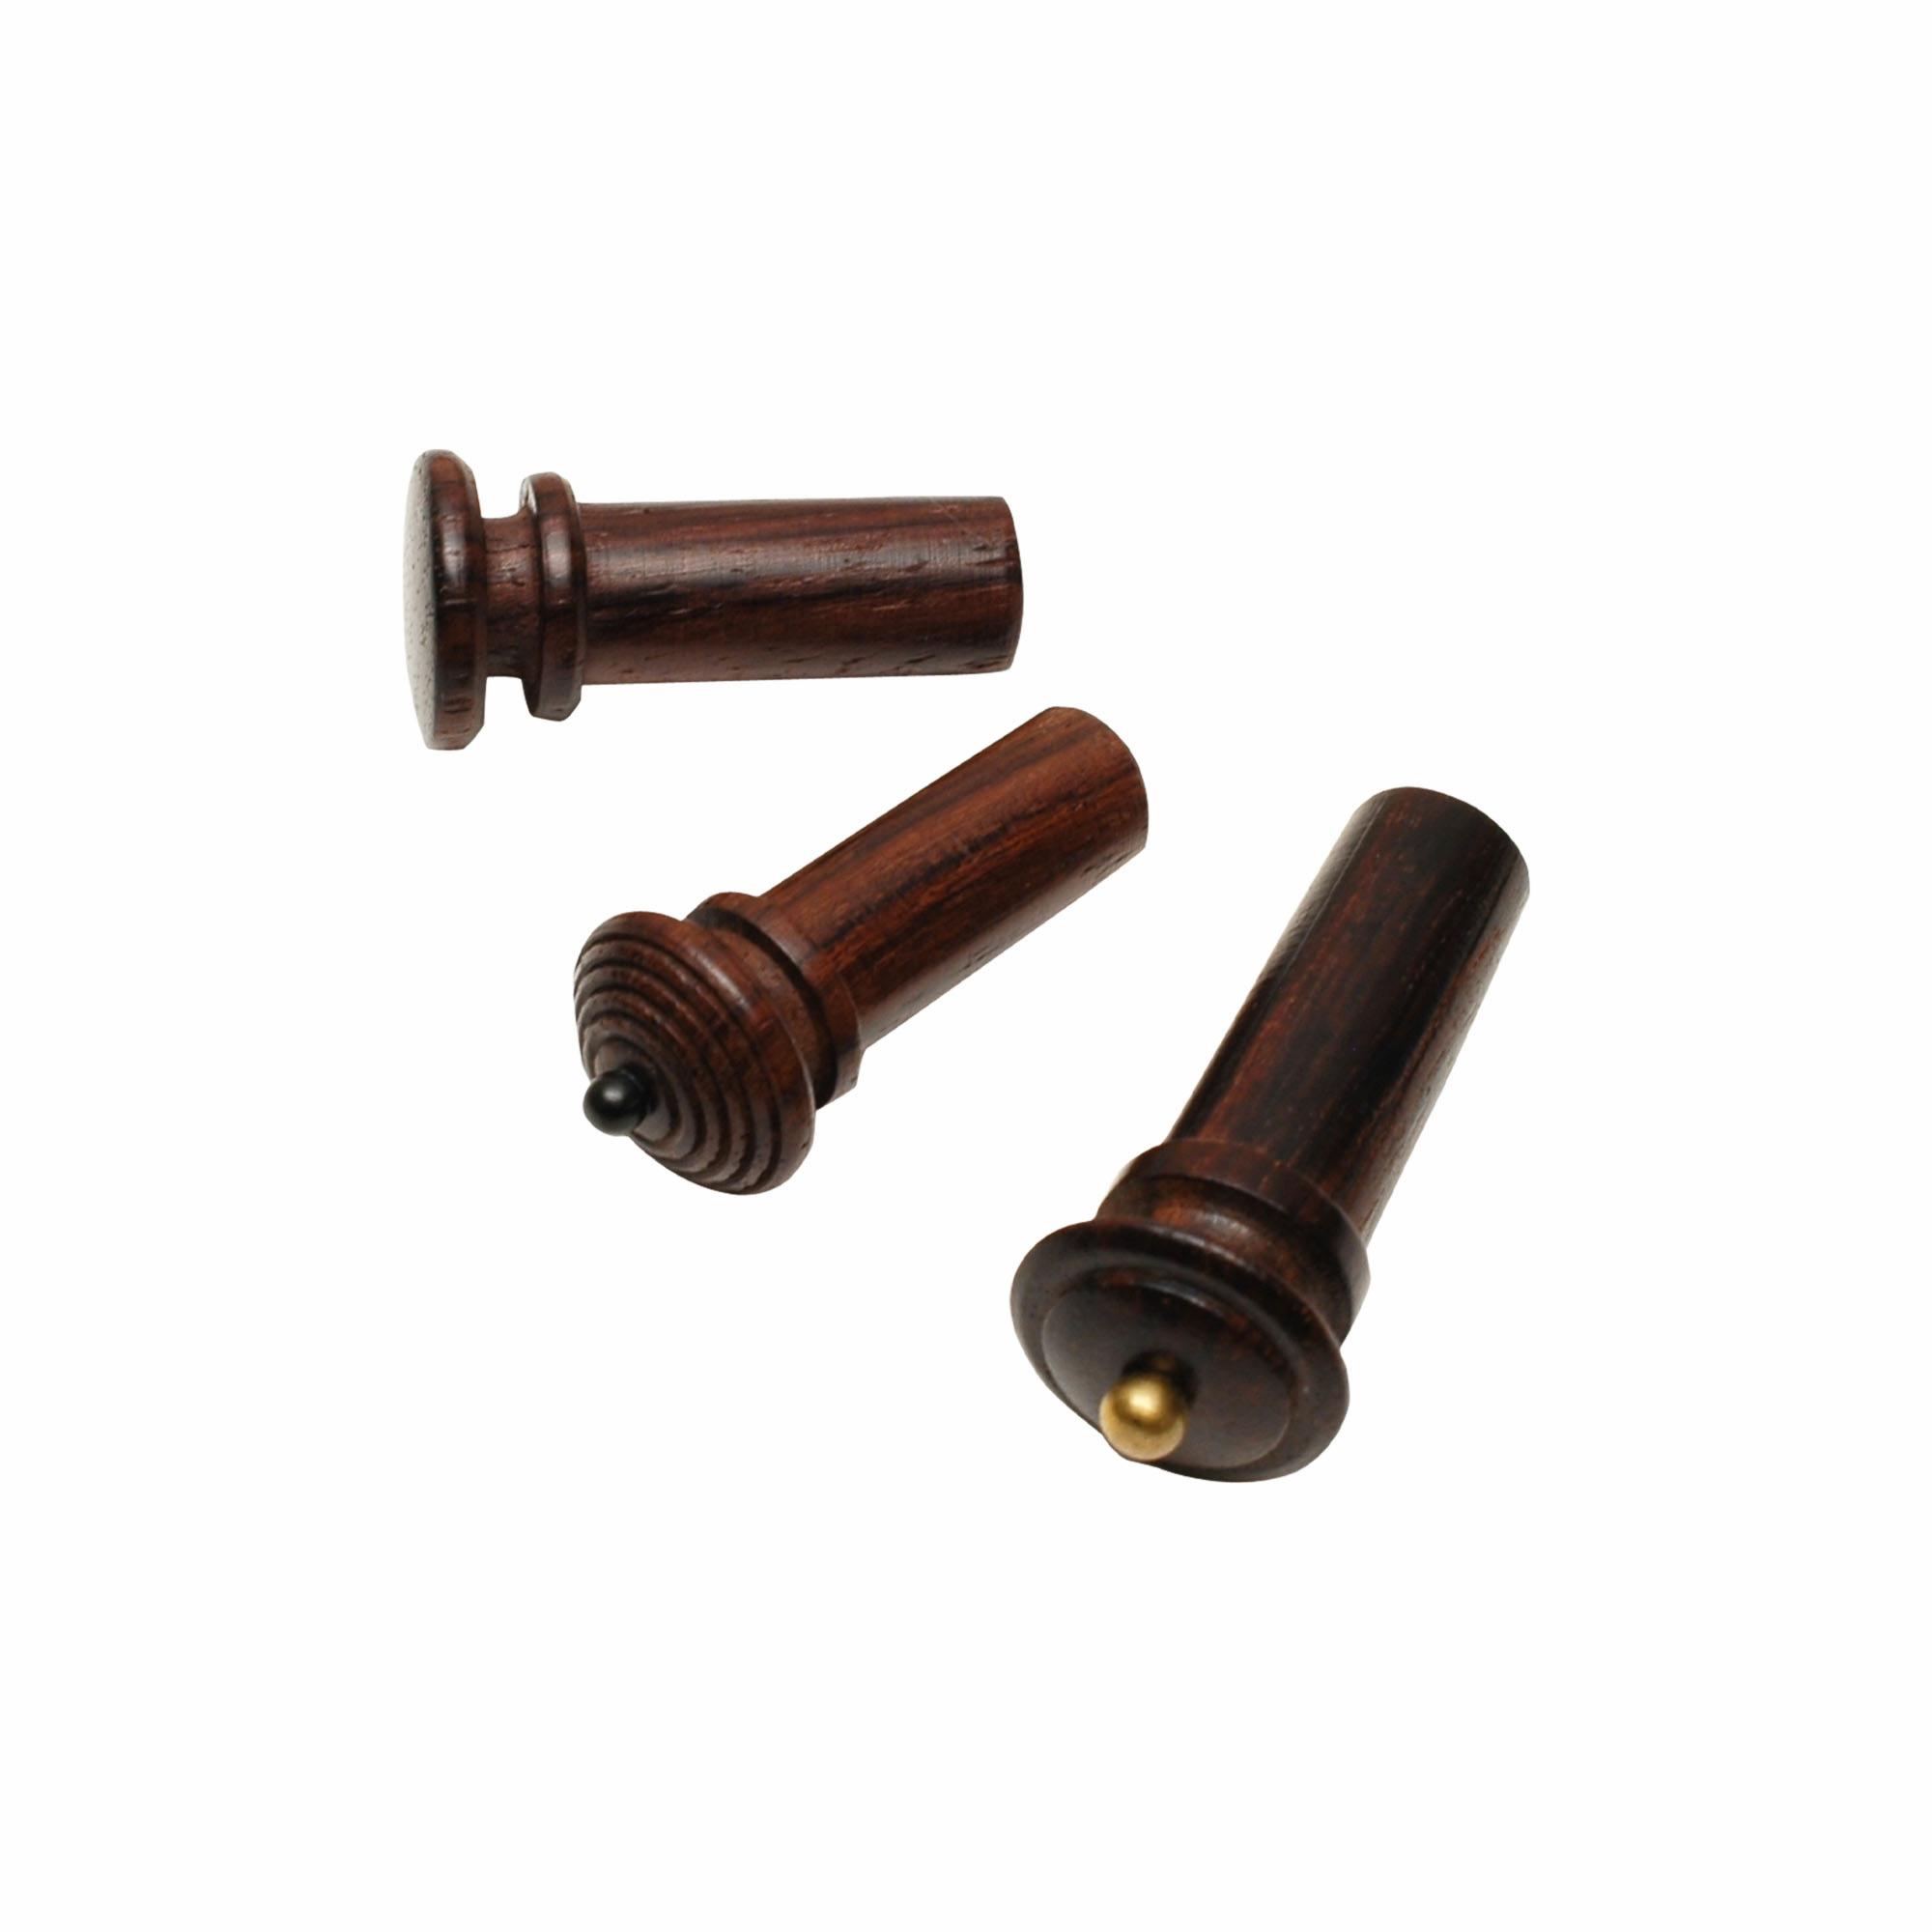 Endbuttons, Rosewood